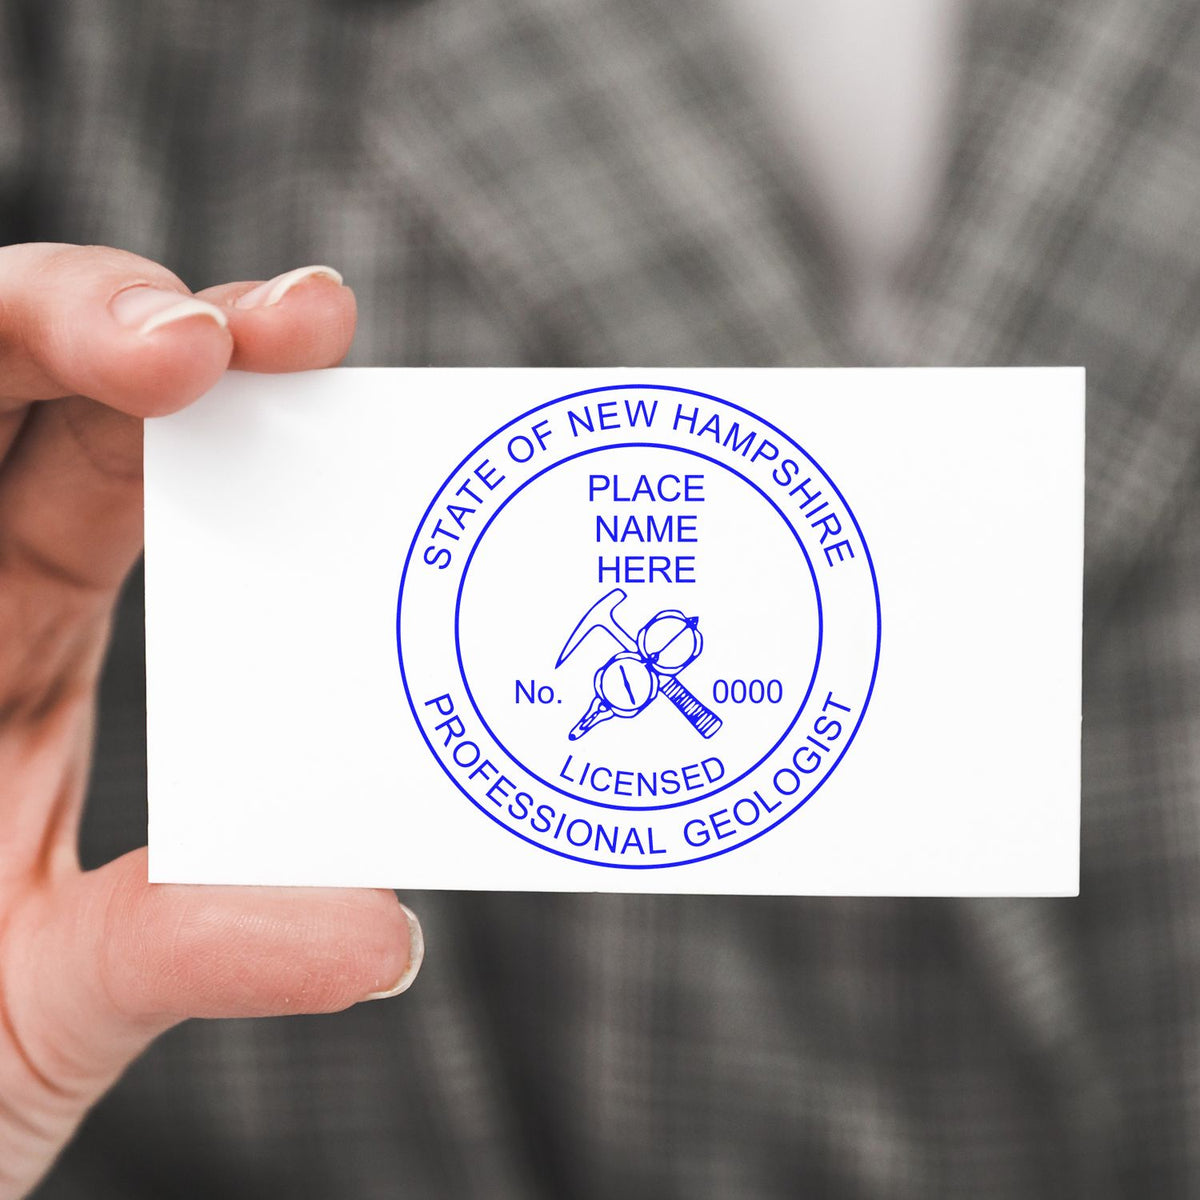 An alternative view of the New Hampshire Professional Geologist Seal Stamp stamped on a sheet of paper showing the image in use